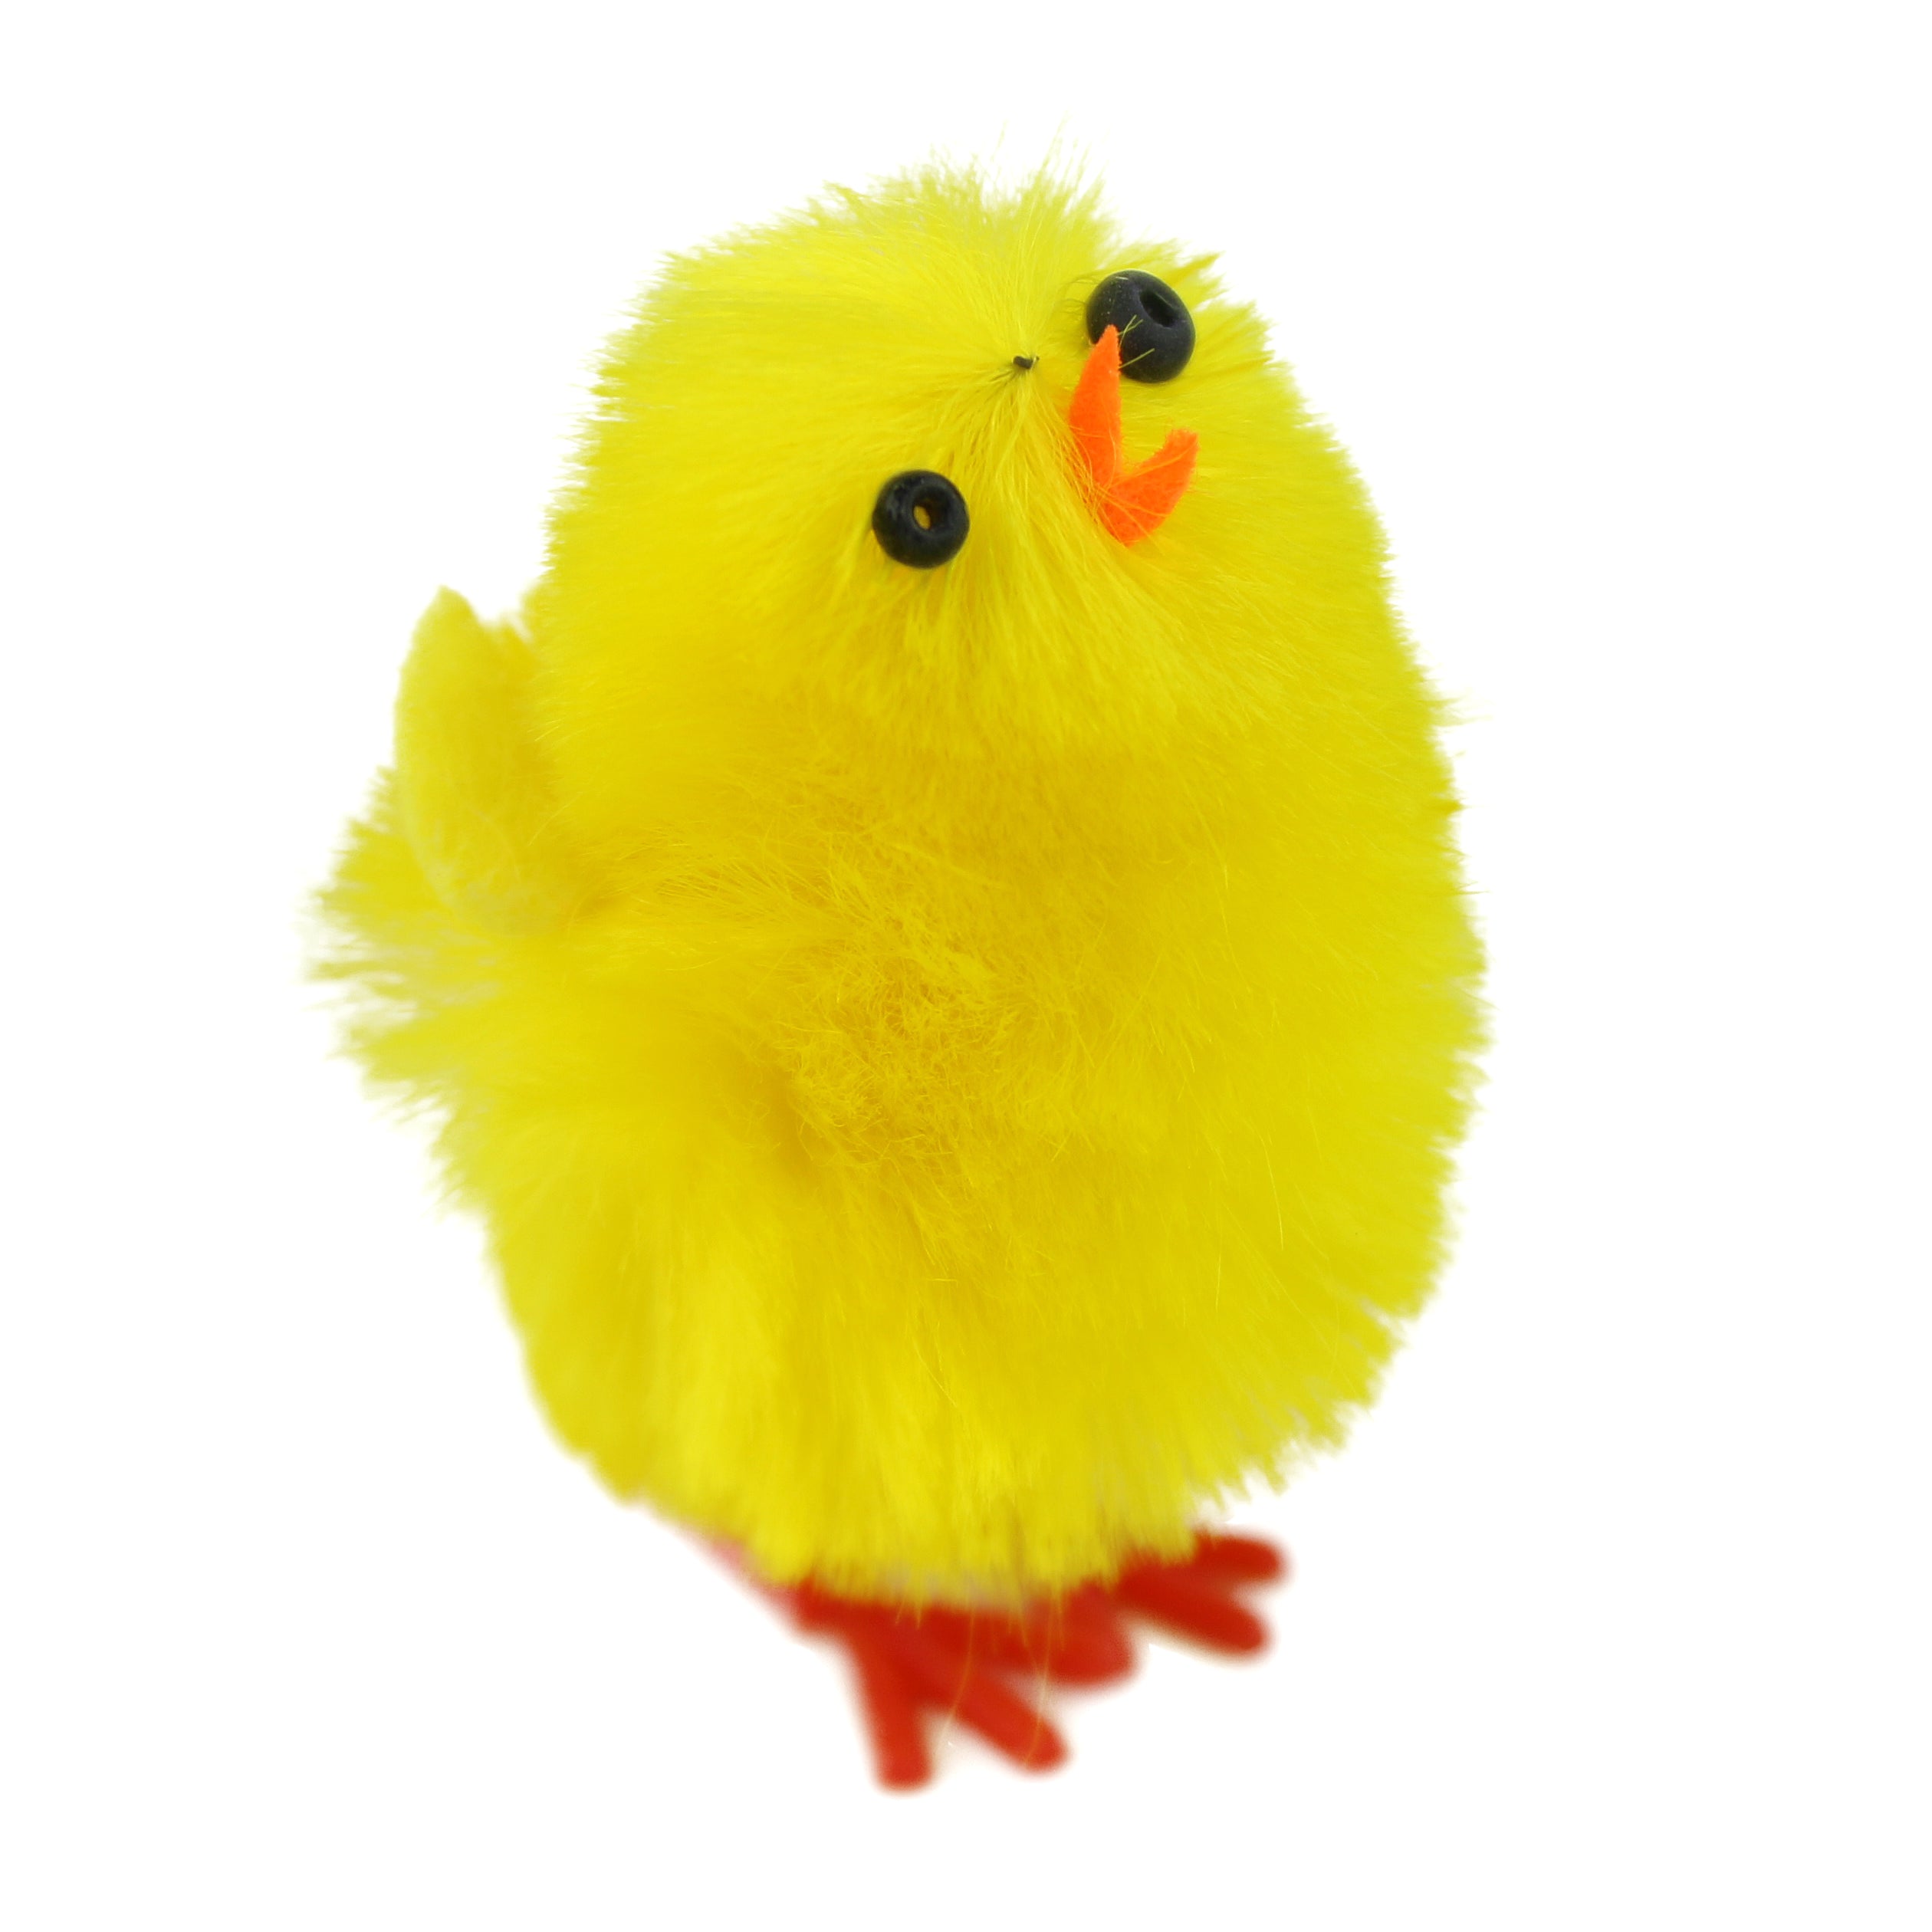 chenille Easter chicks colorful decor set of 36, 1 1/2-Inch | Bstaofy - Glow Guards